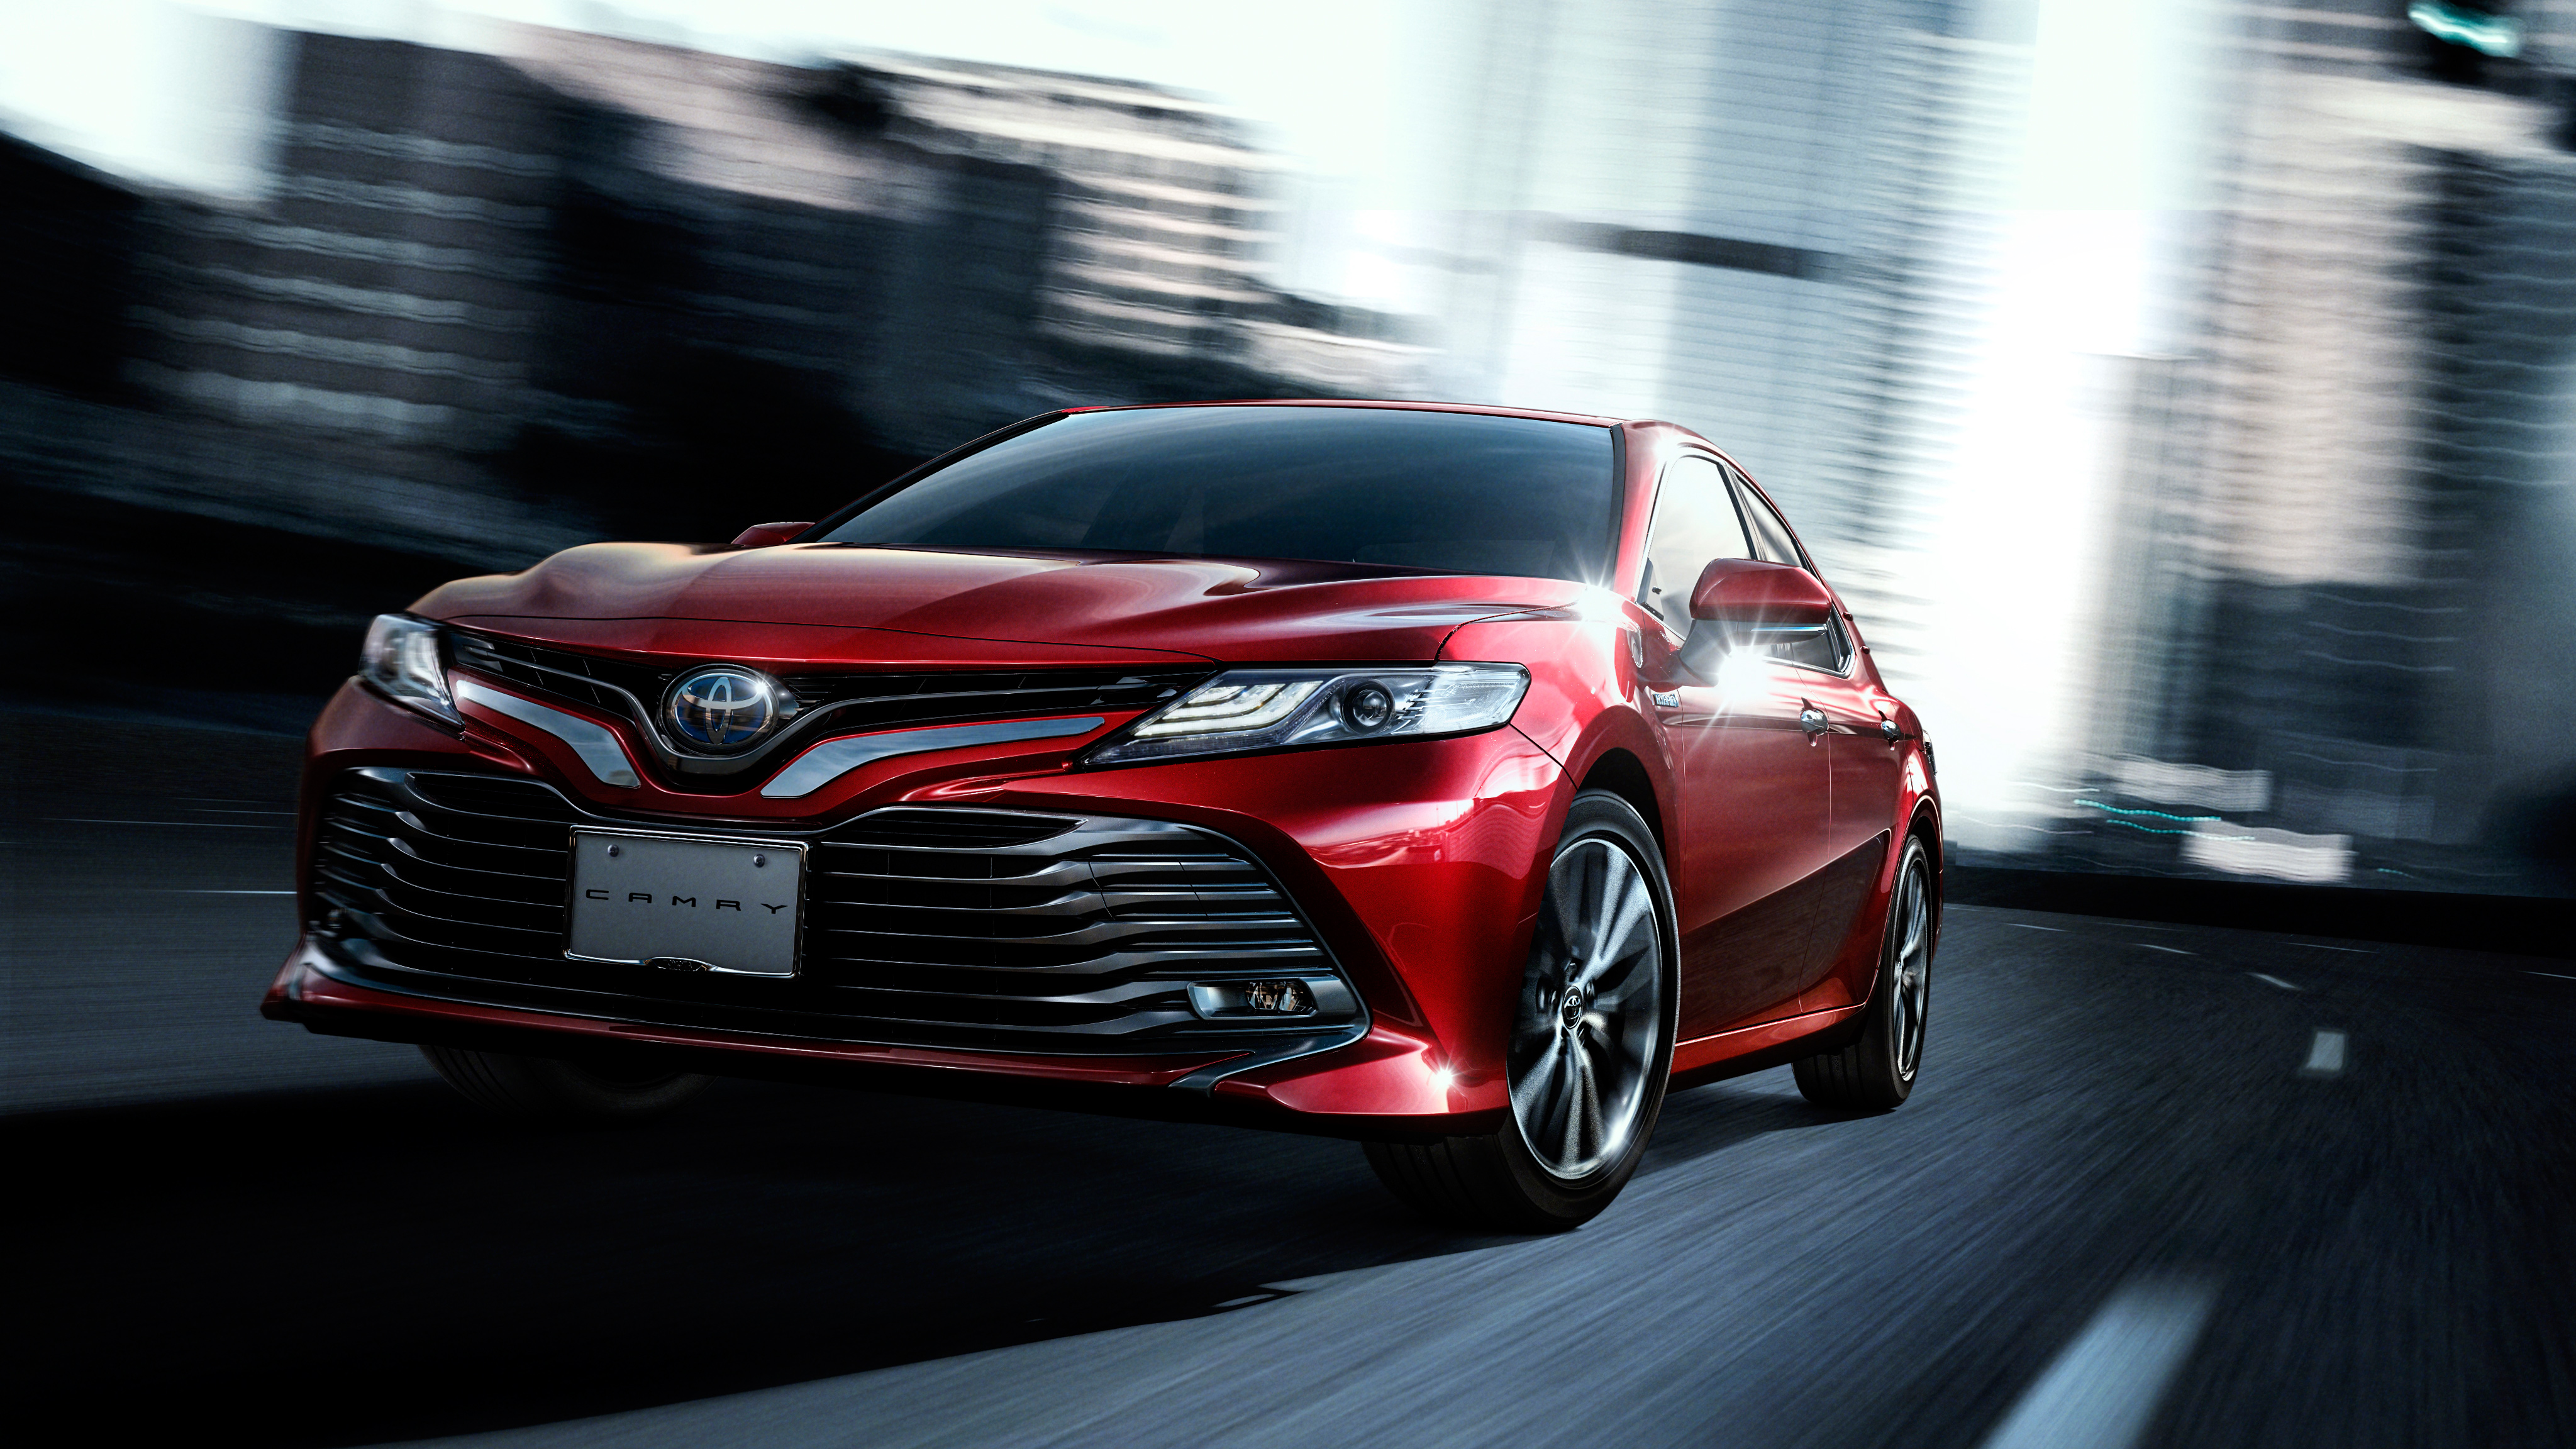 Toyota Camry Wallpaper Pictures Photos And HD